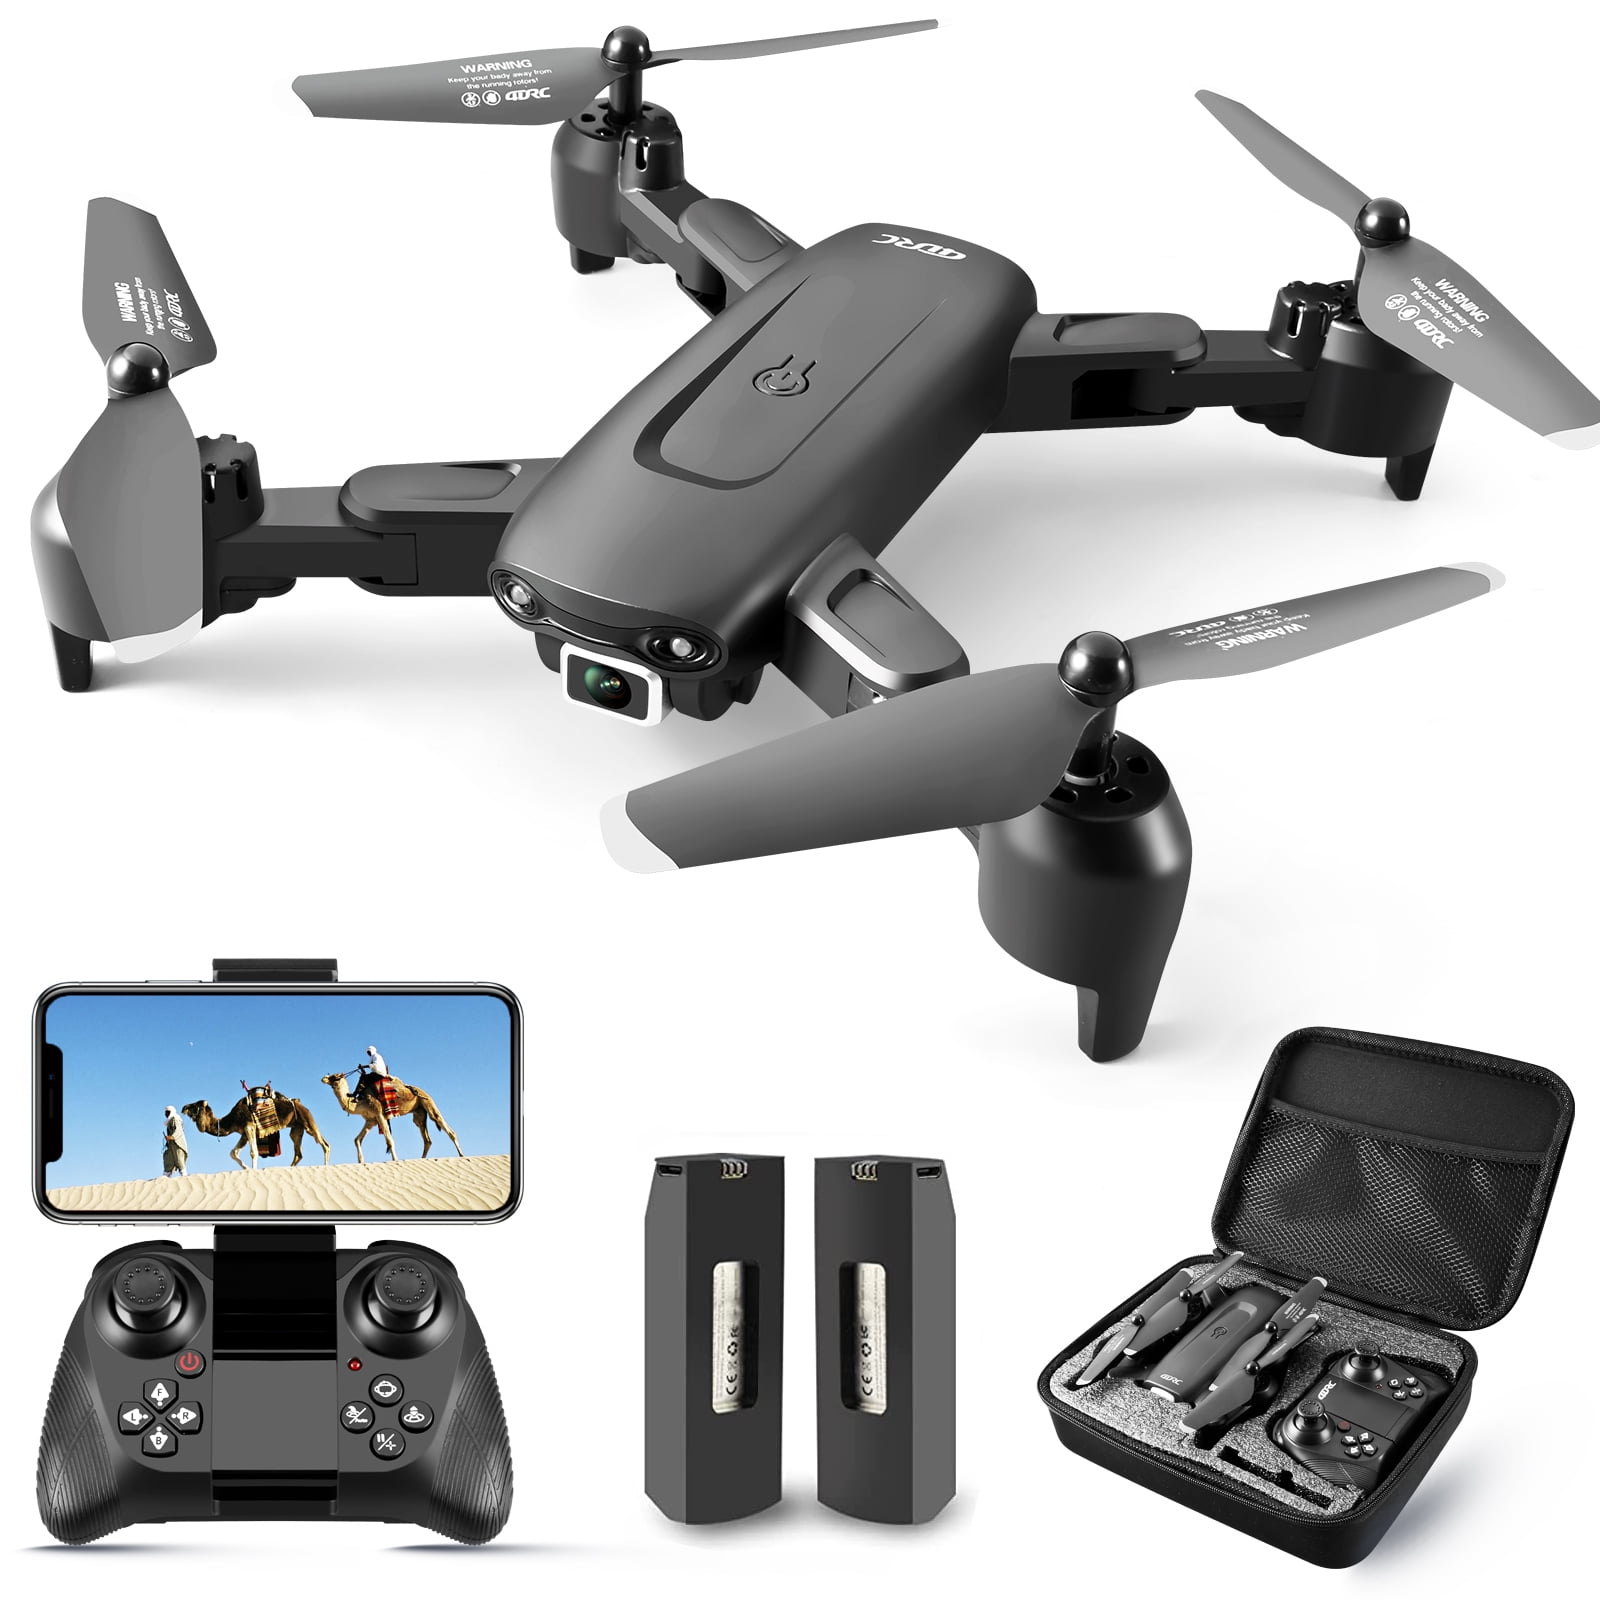 SDJMa Drones with Camera for Adults Foldable RC Quadcopter E88 Drone with  1080P HD Camera Mini Drone for Kids Gifts, WiFi FPV Live Video, Altitude  Hold, One Key Take Off/Landing, 3D Flip 